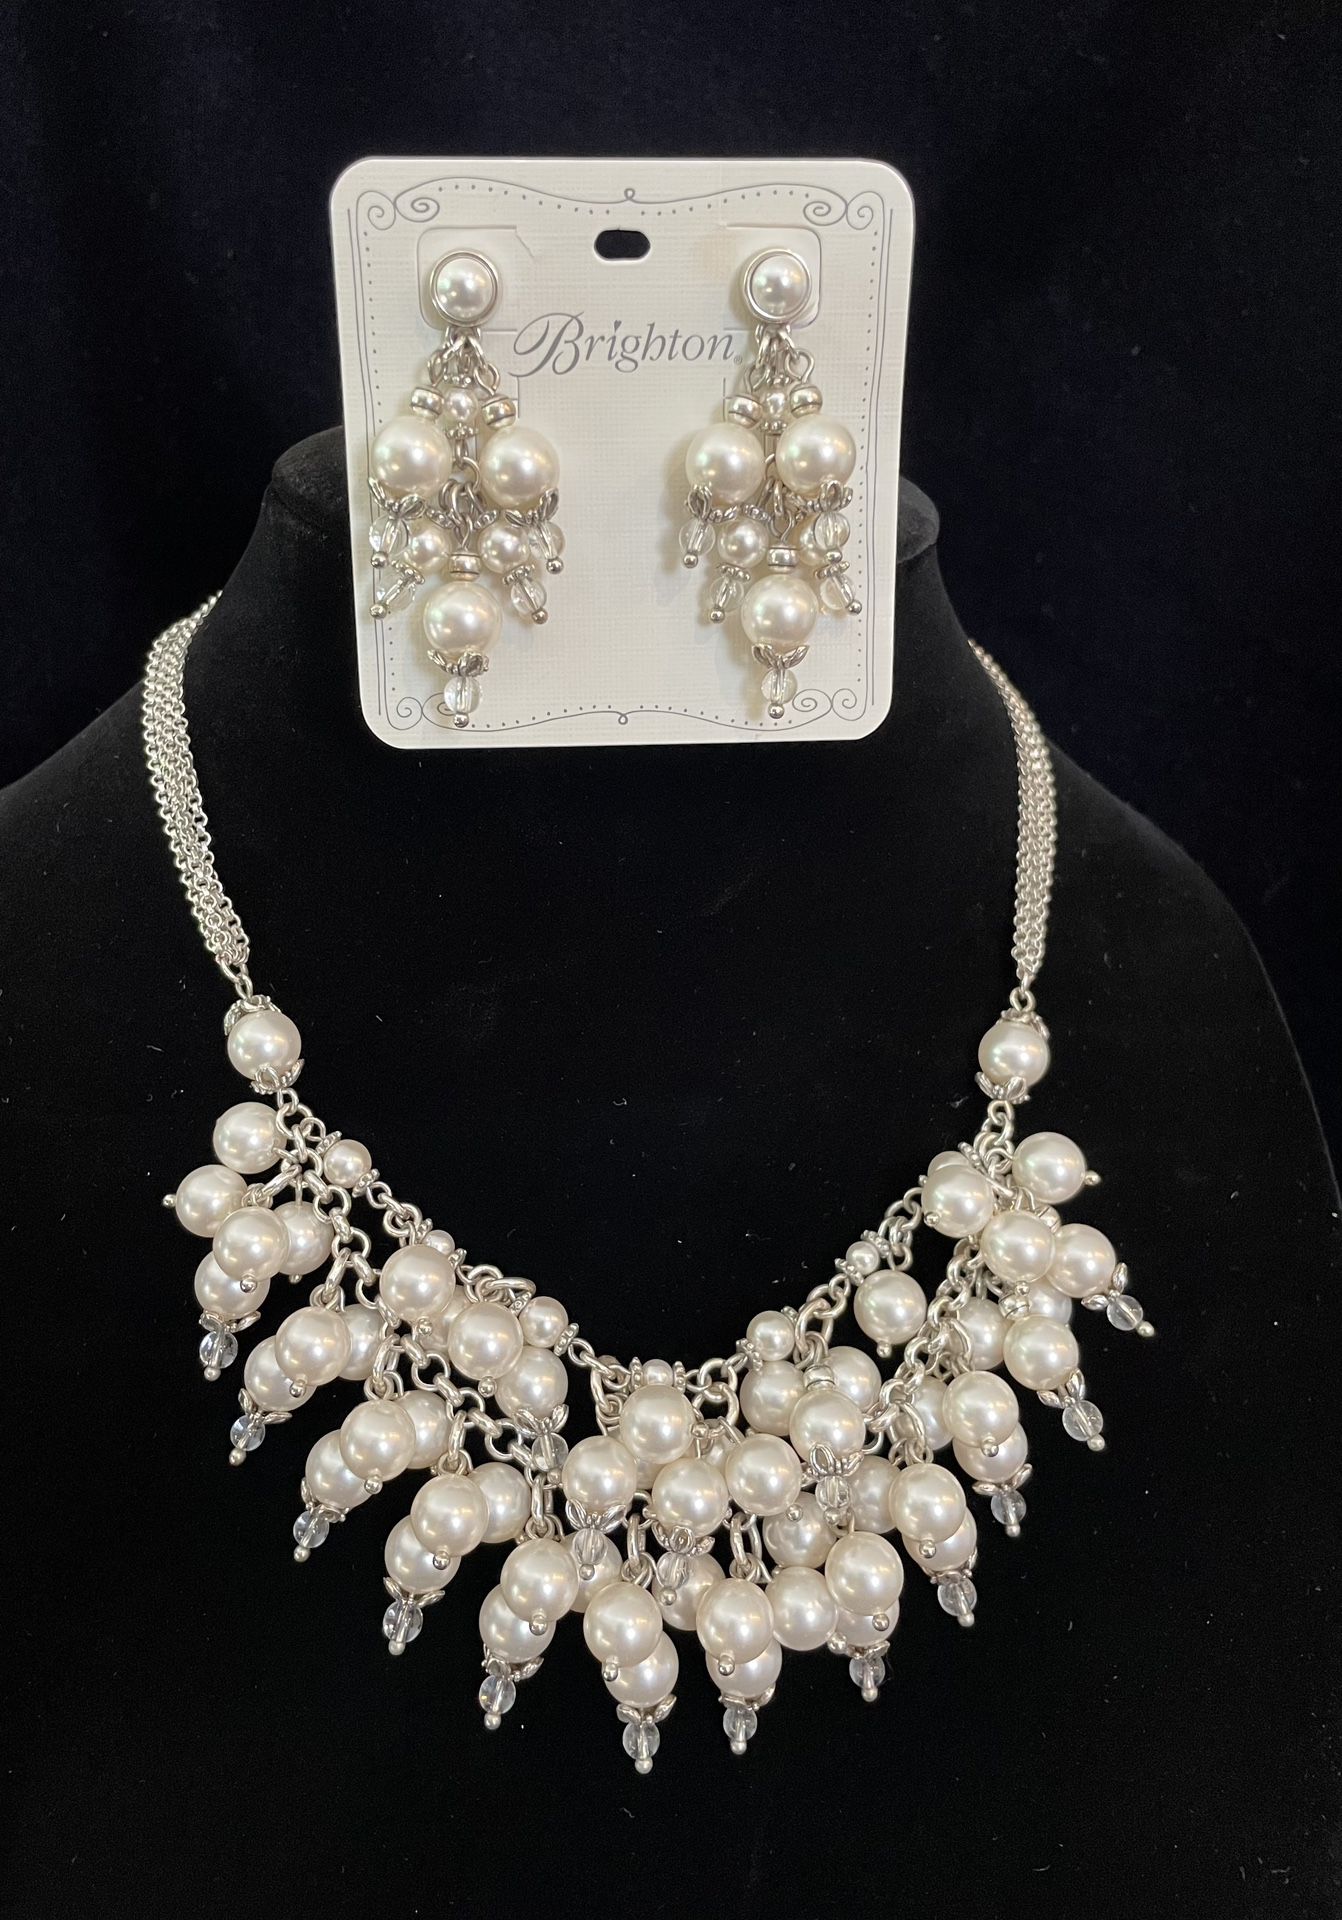 Brighton Pearl-ilious Necklace & Earrings